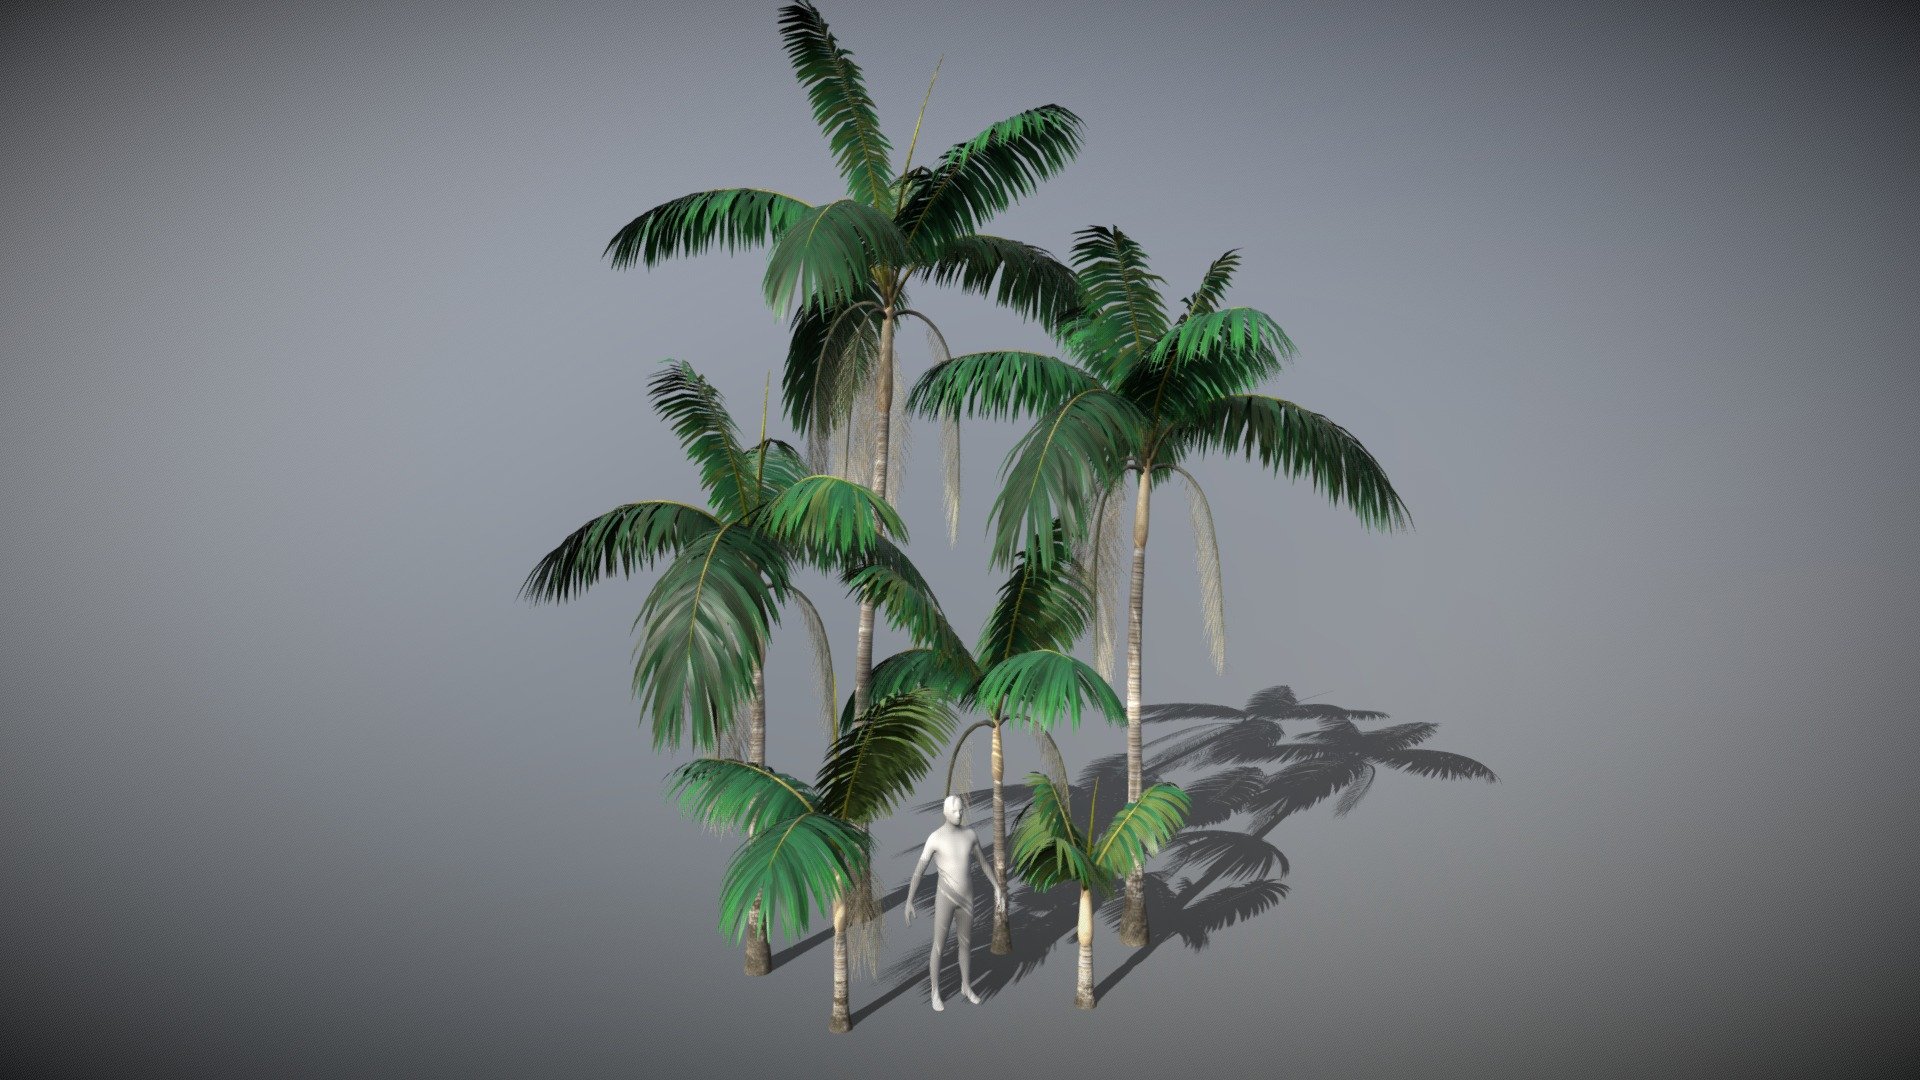 This growth succession of Dictyosperma Album (endemic palm tree) is part of my 2010 studies of Mauritius pristine vegetation. I have gathered reference images during fieldwork on site and used procedural modeling techniques to recreate them. I also made LODs for realtime applications. See https://bodoschuetze.de/portfolio/sciencealive_mauritius_3d/ for more Information 3d model